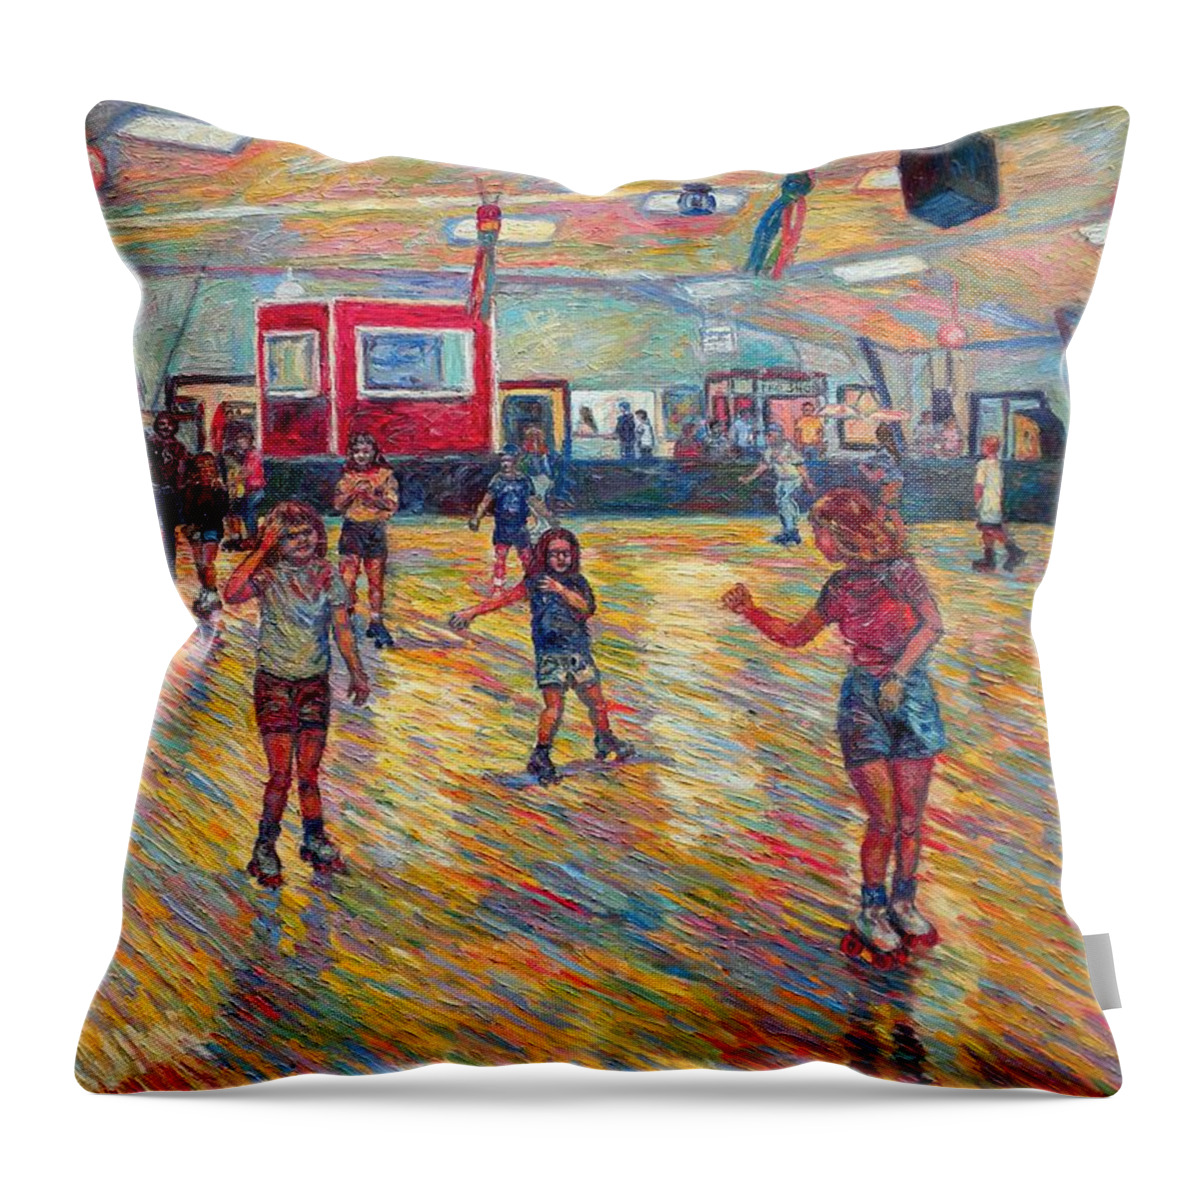 Figure Throw Pillow featuring the painting Dominion Skating Rink by Kendall Kessler